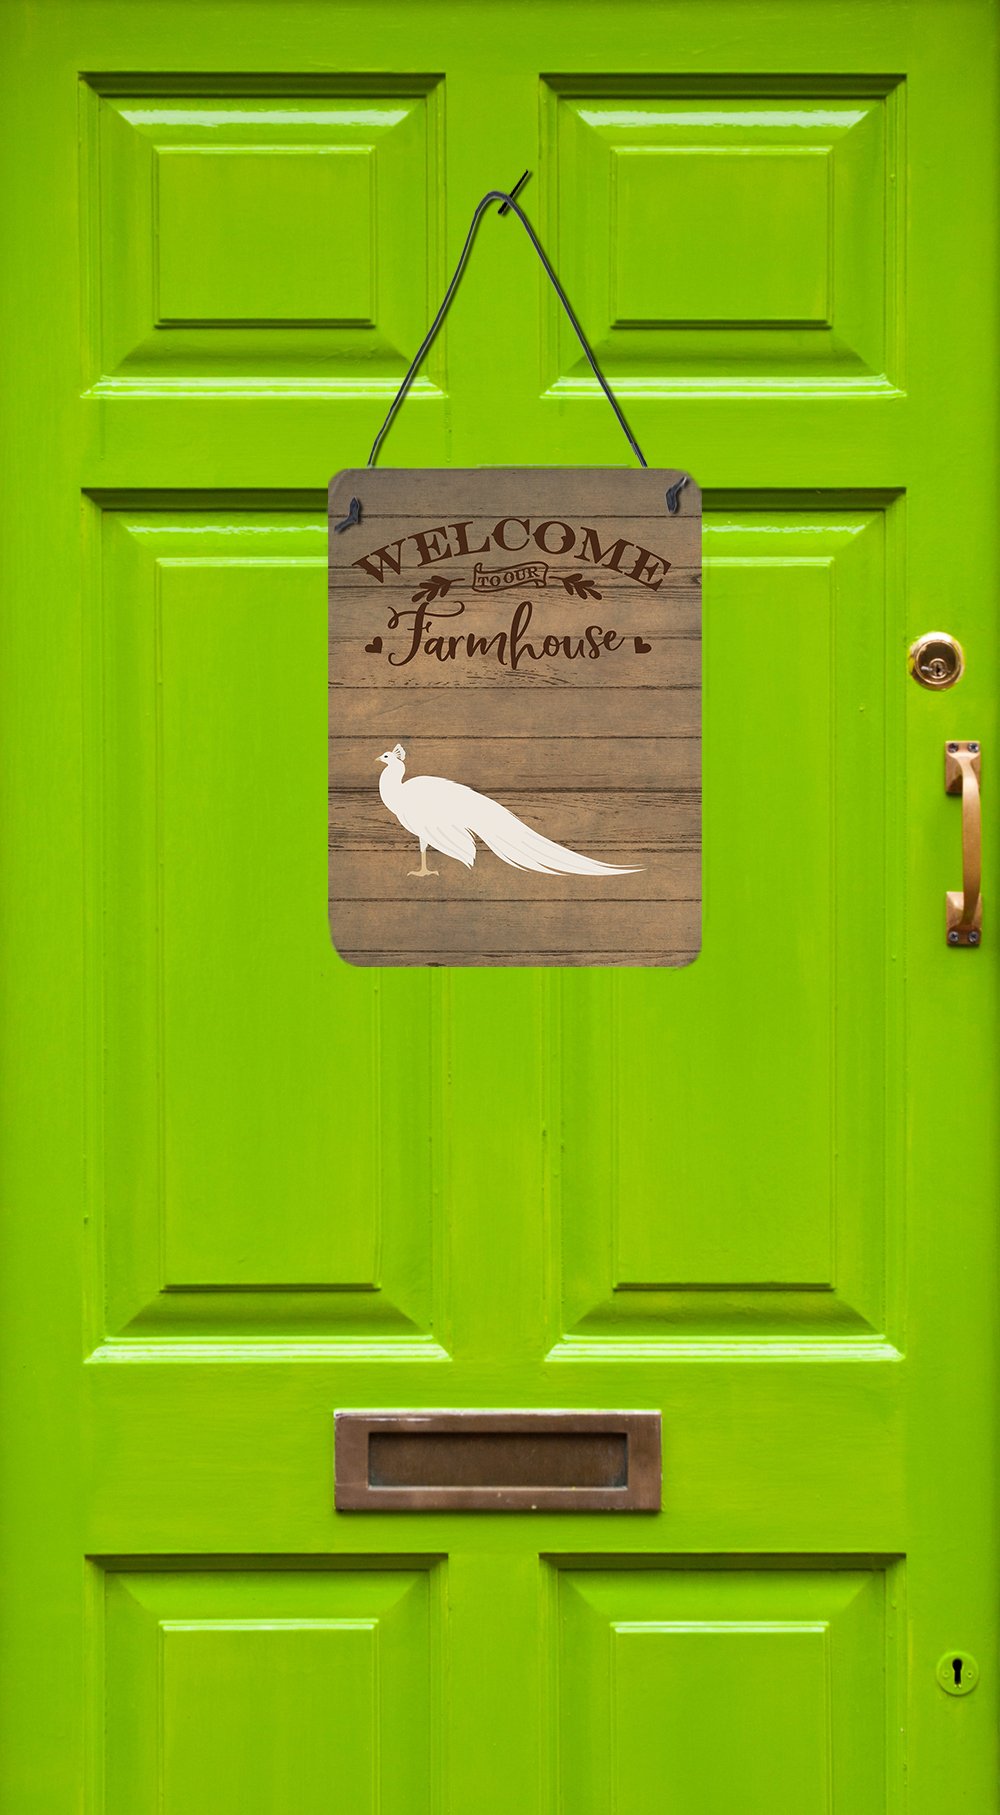 White Peacock Peafowl Welcome Wall or Door Hanging Prints CK6870DS1216 by Caroline's Treasures